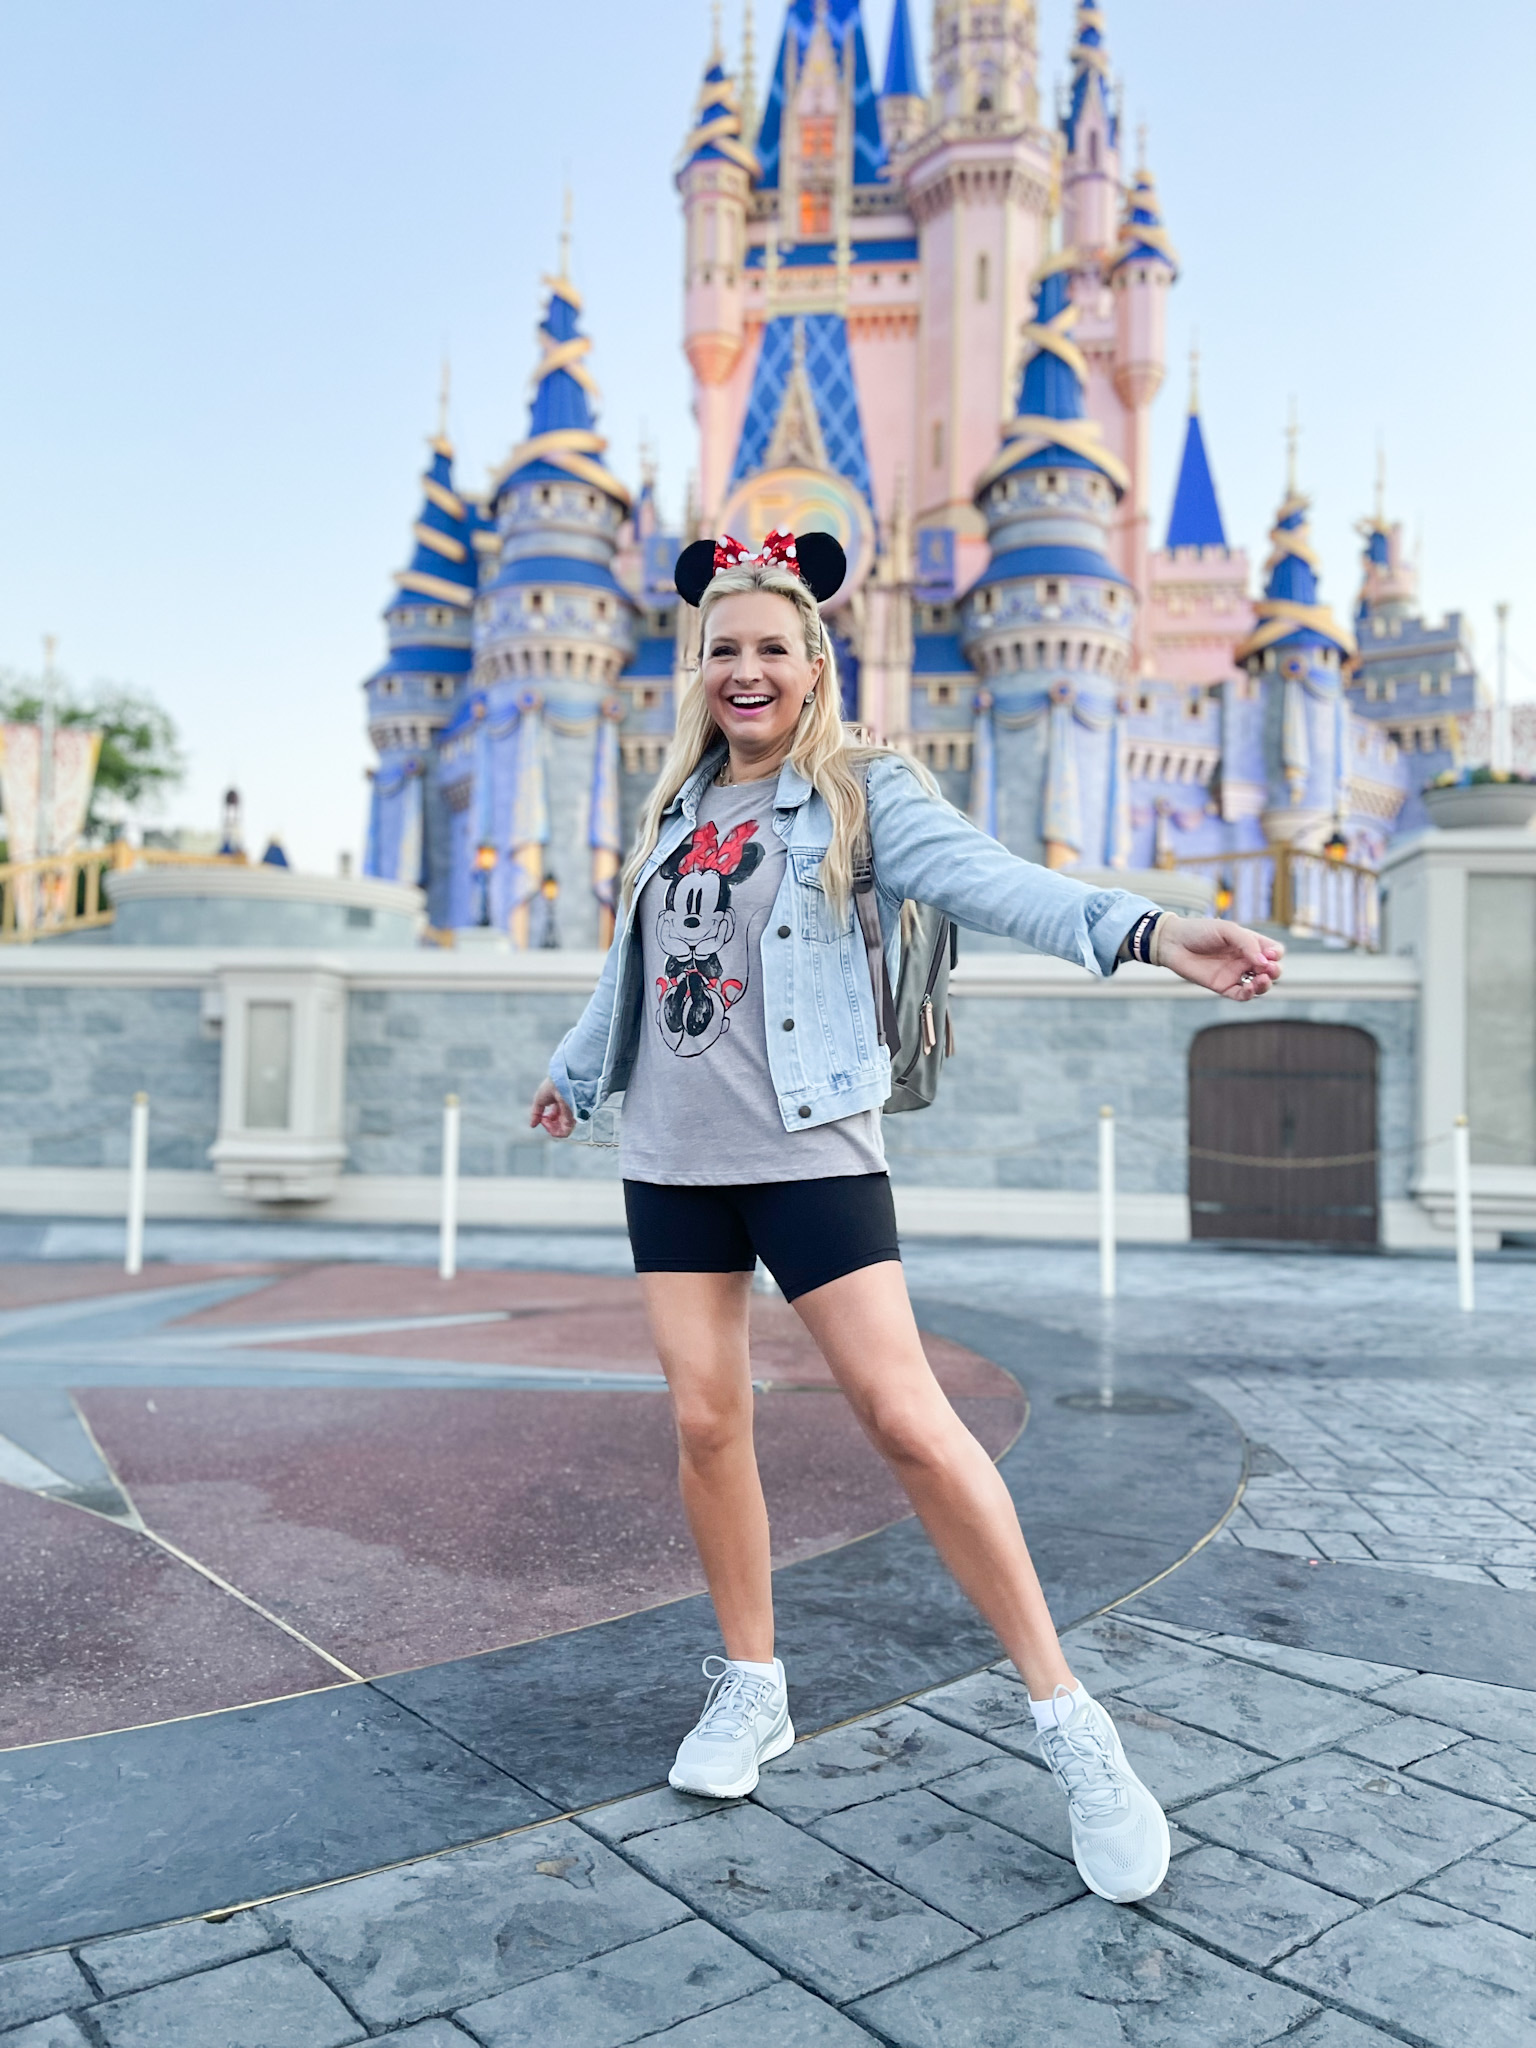 We found the most magical outfits for your next Disney vacation - GirlsLife